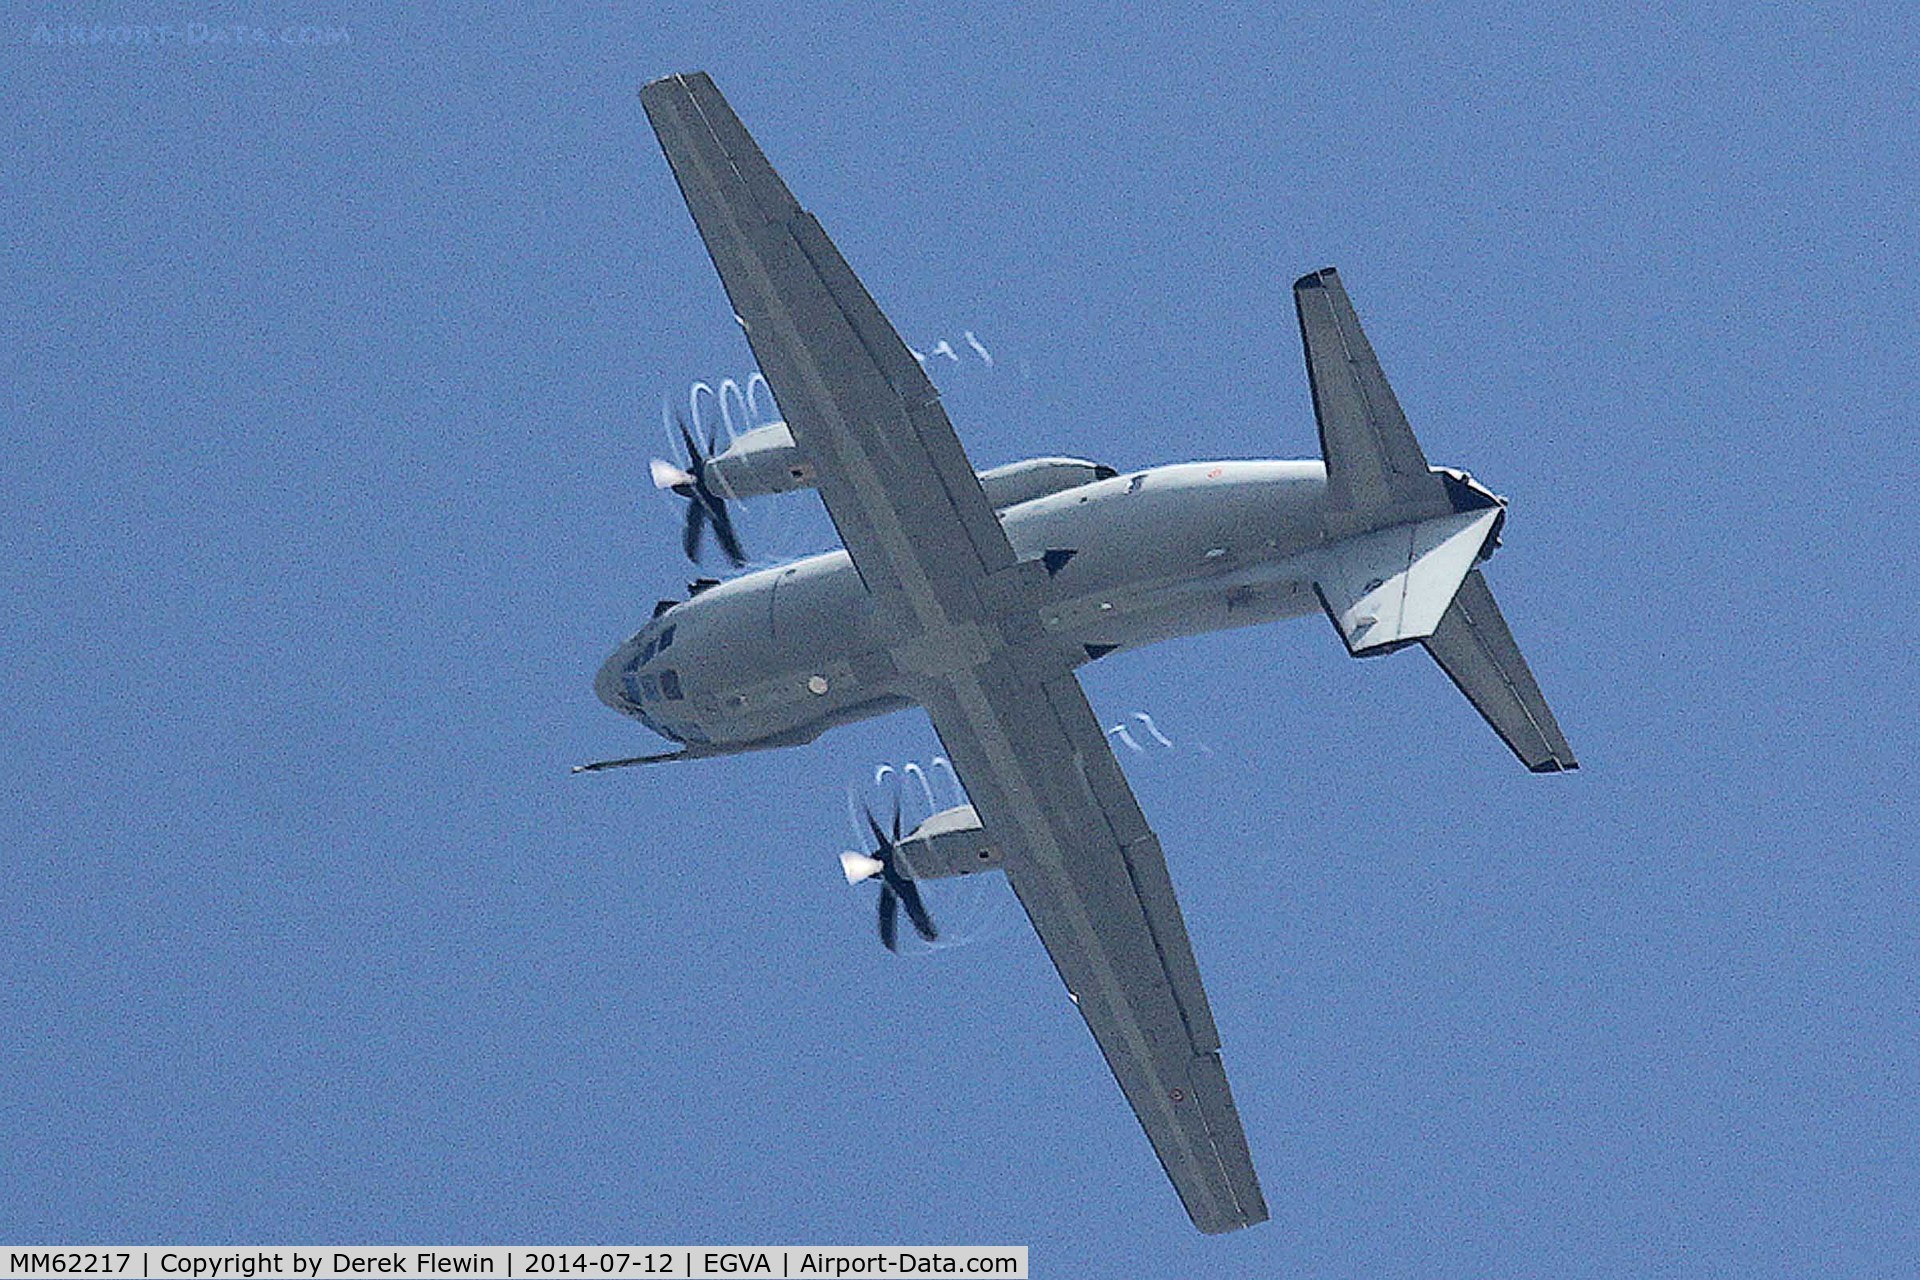 MM62217, 2007 Alenia C-27J Spartan C/N 4116, RIAT 2014, C-27J Spartan, 311° Gruppo/RSV Italian Air Force, top of a loop, only heavy lift aircraft in service to be able to carry out this manoeuvre.